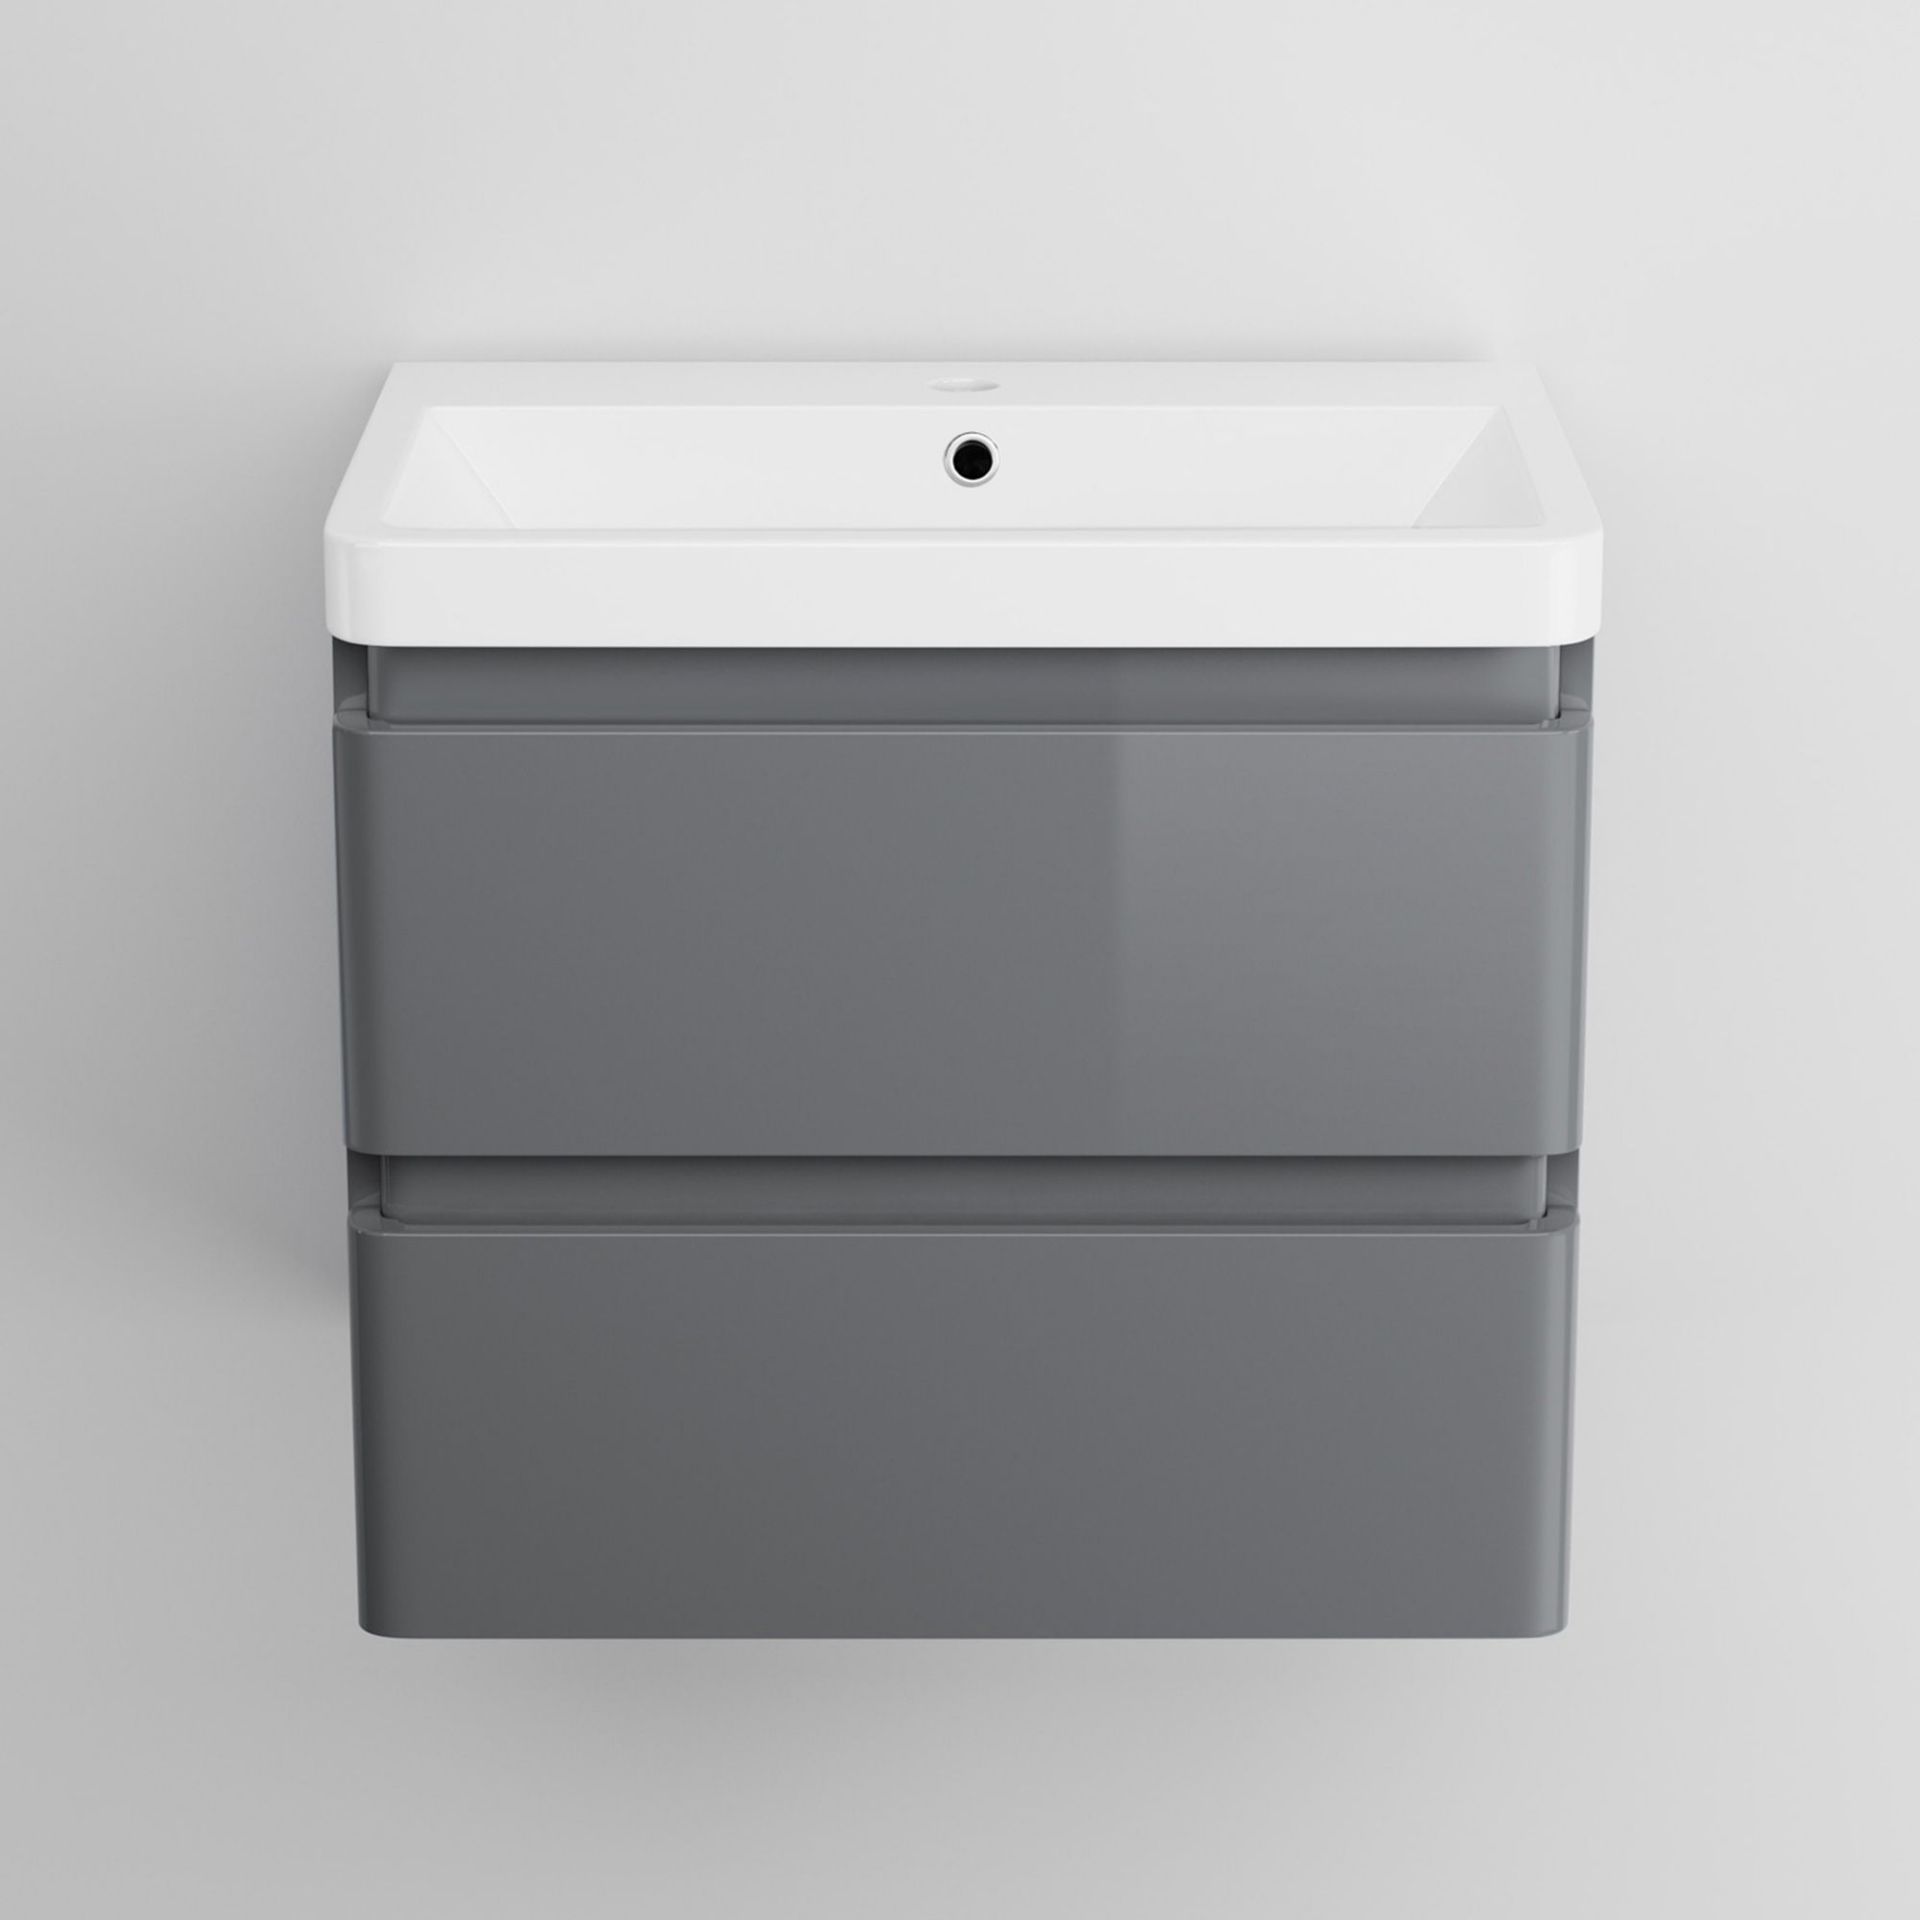 New & Boxed 600mm Denver II Grey Built In Basin Drawer Unit - Wall Hung. RRP £849.99 Mf2402.W... - Image 2 of 2